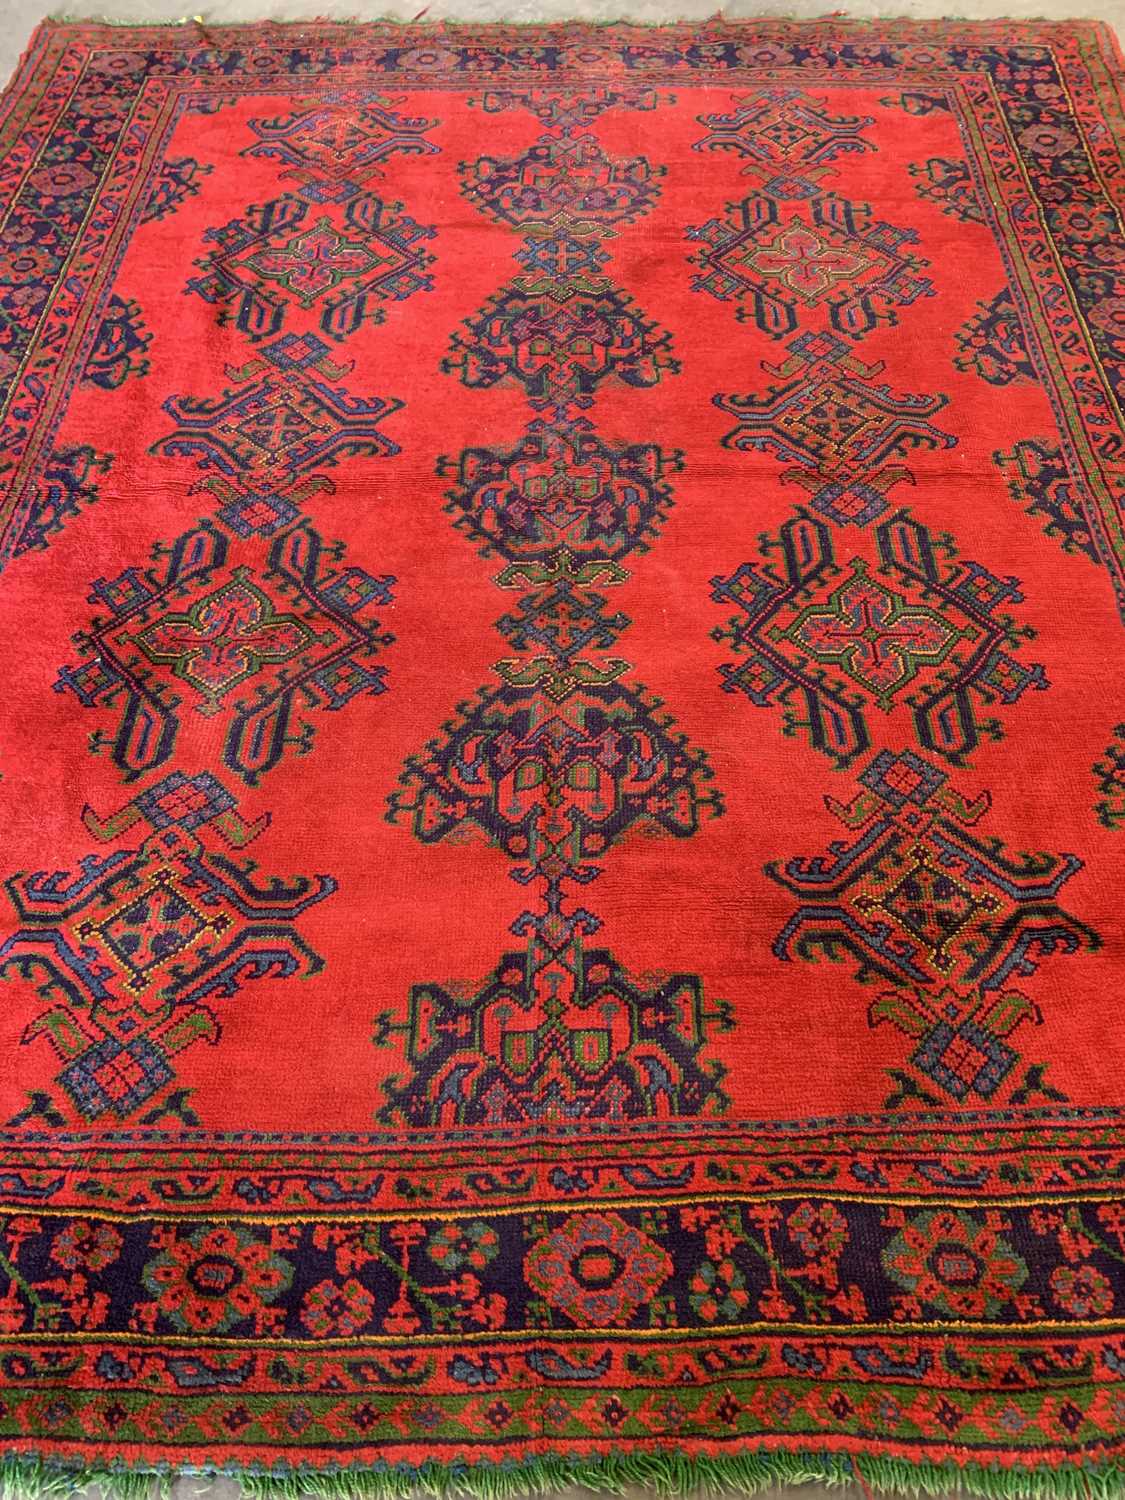 EASTERN STYLE WOOLLEN RUG, red ground with blue border and central repeating pattern, 341 x 294cms